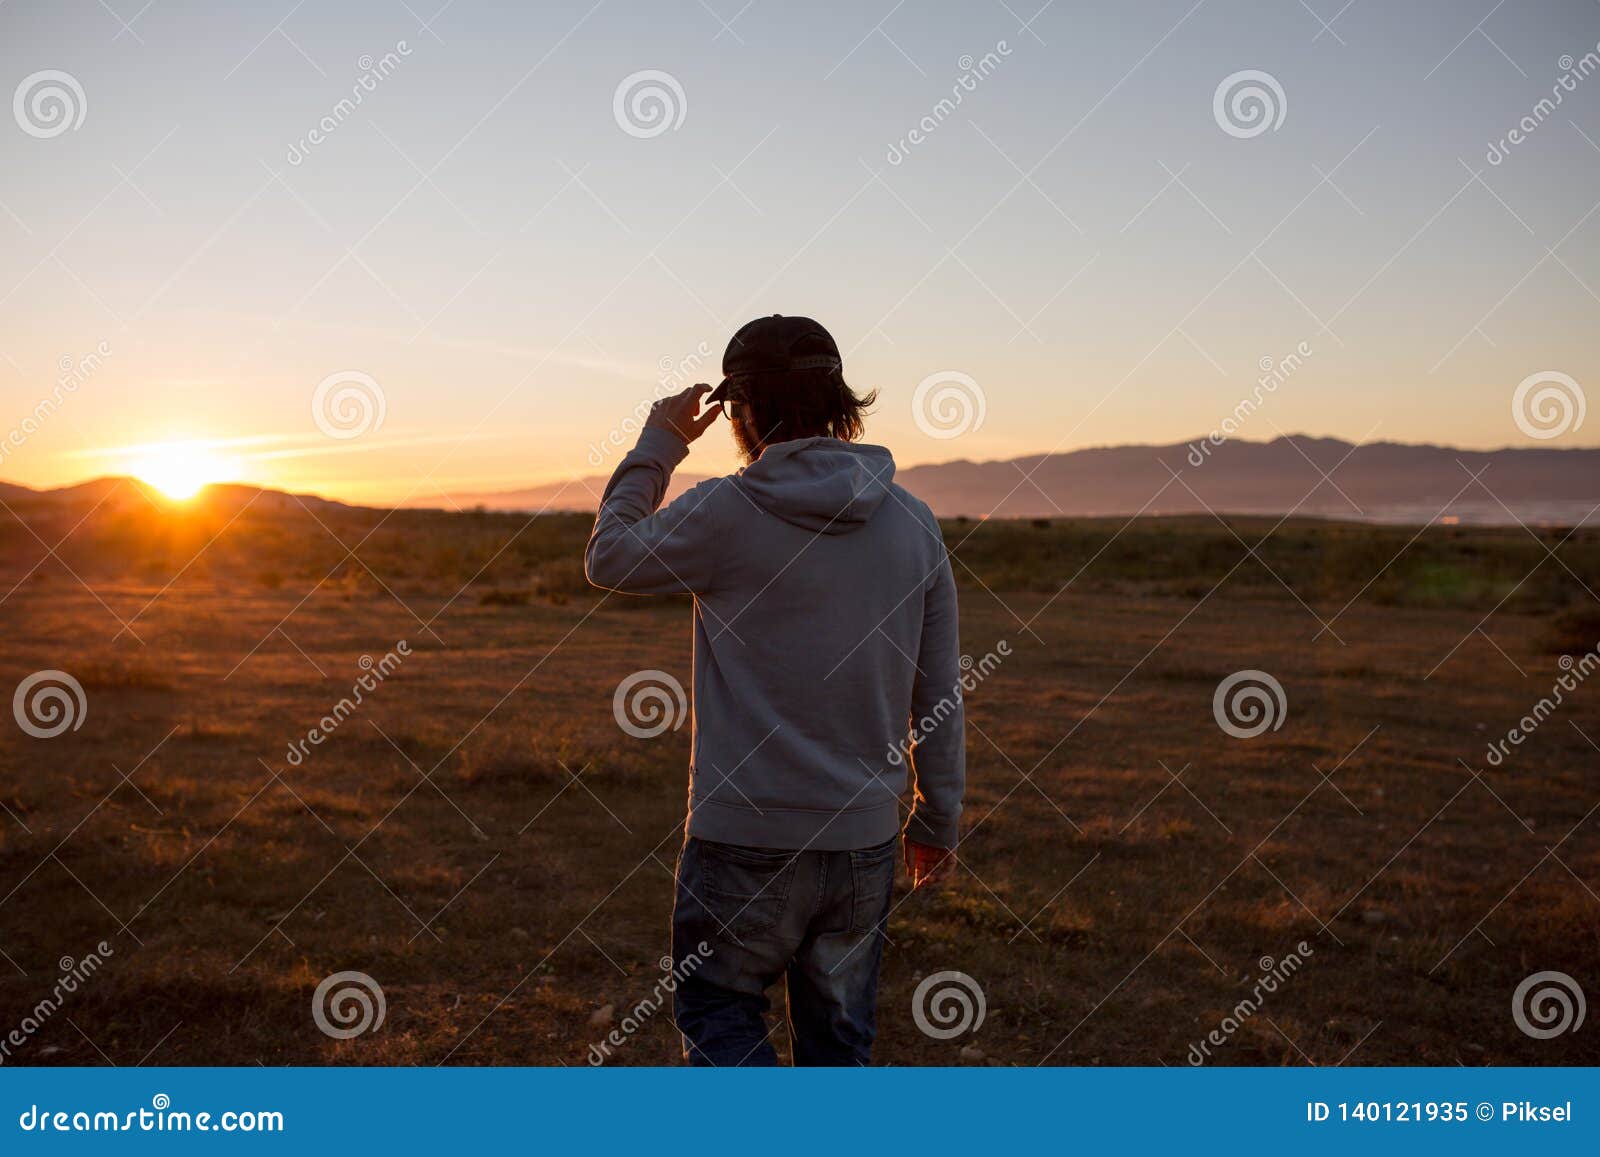 man in a pristine landscape during a beautiful blazing sunset